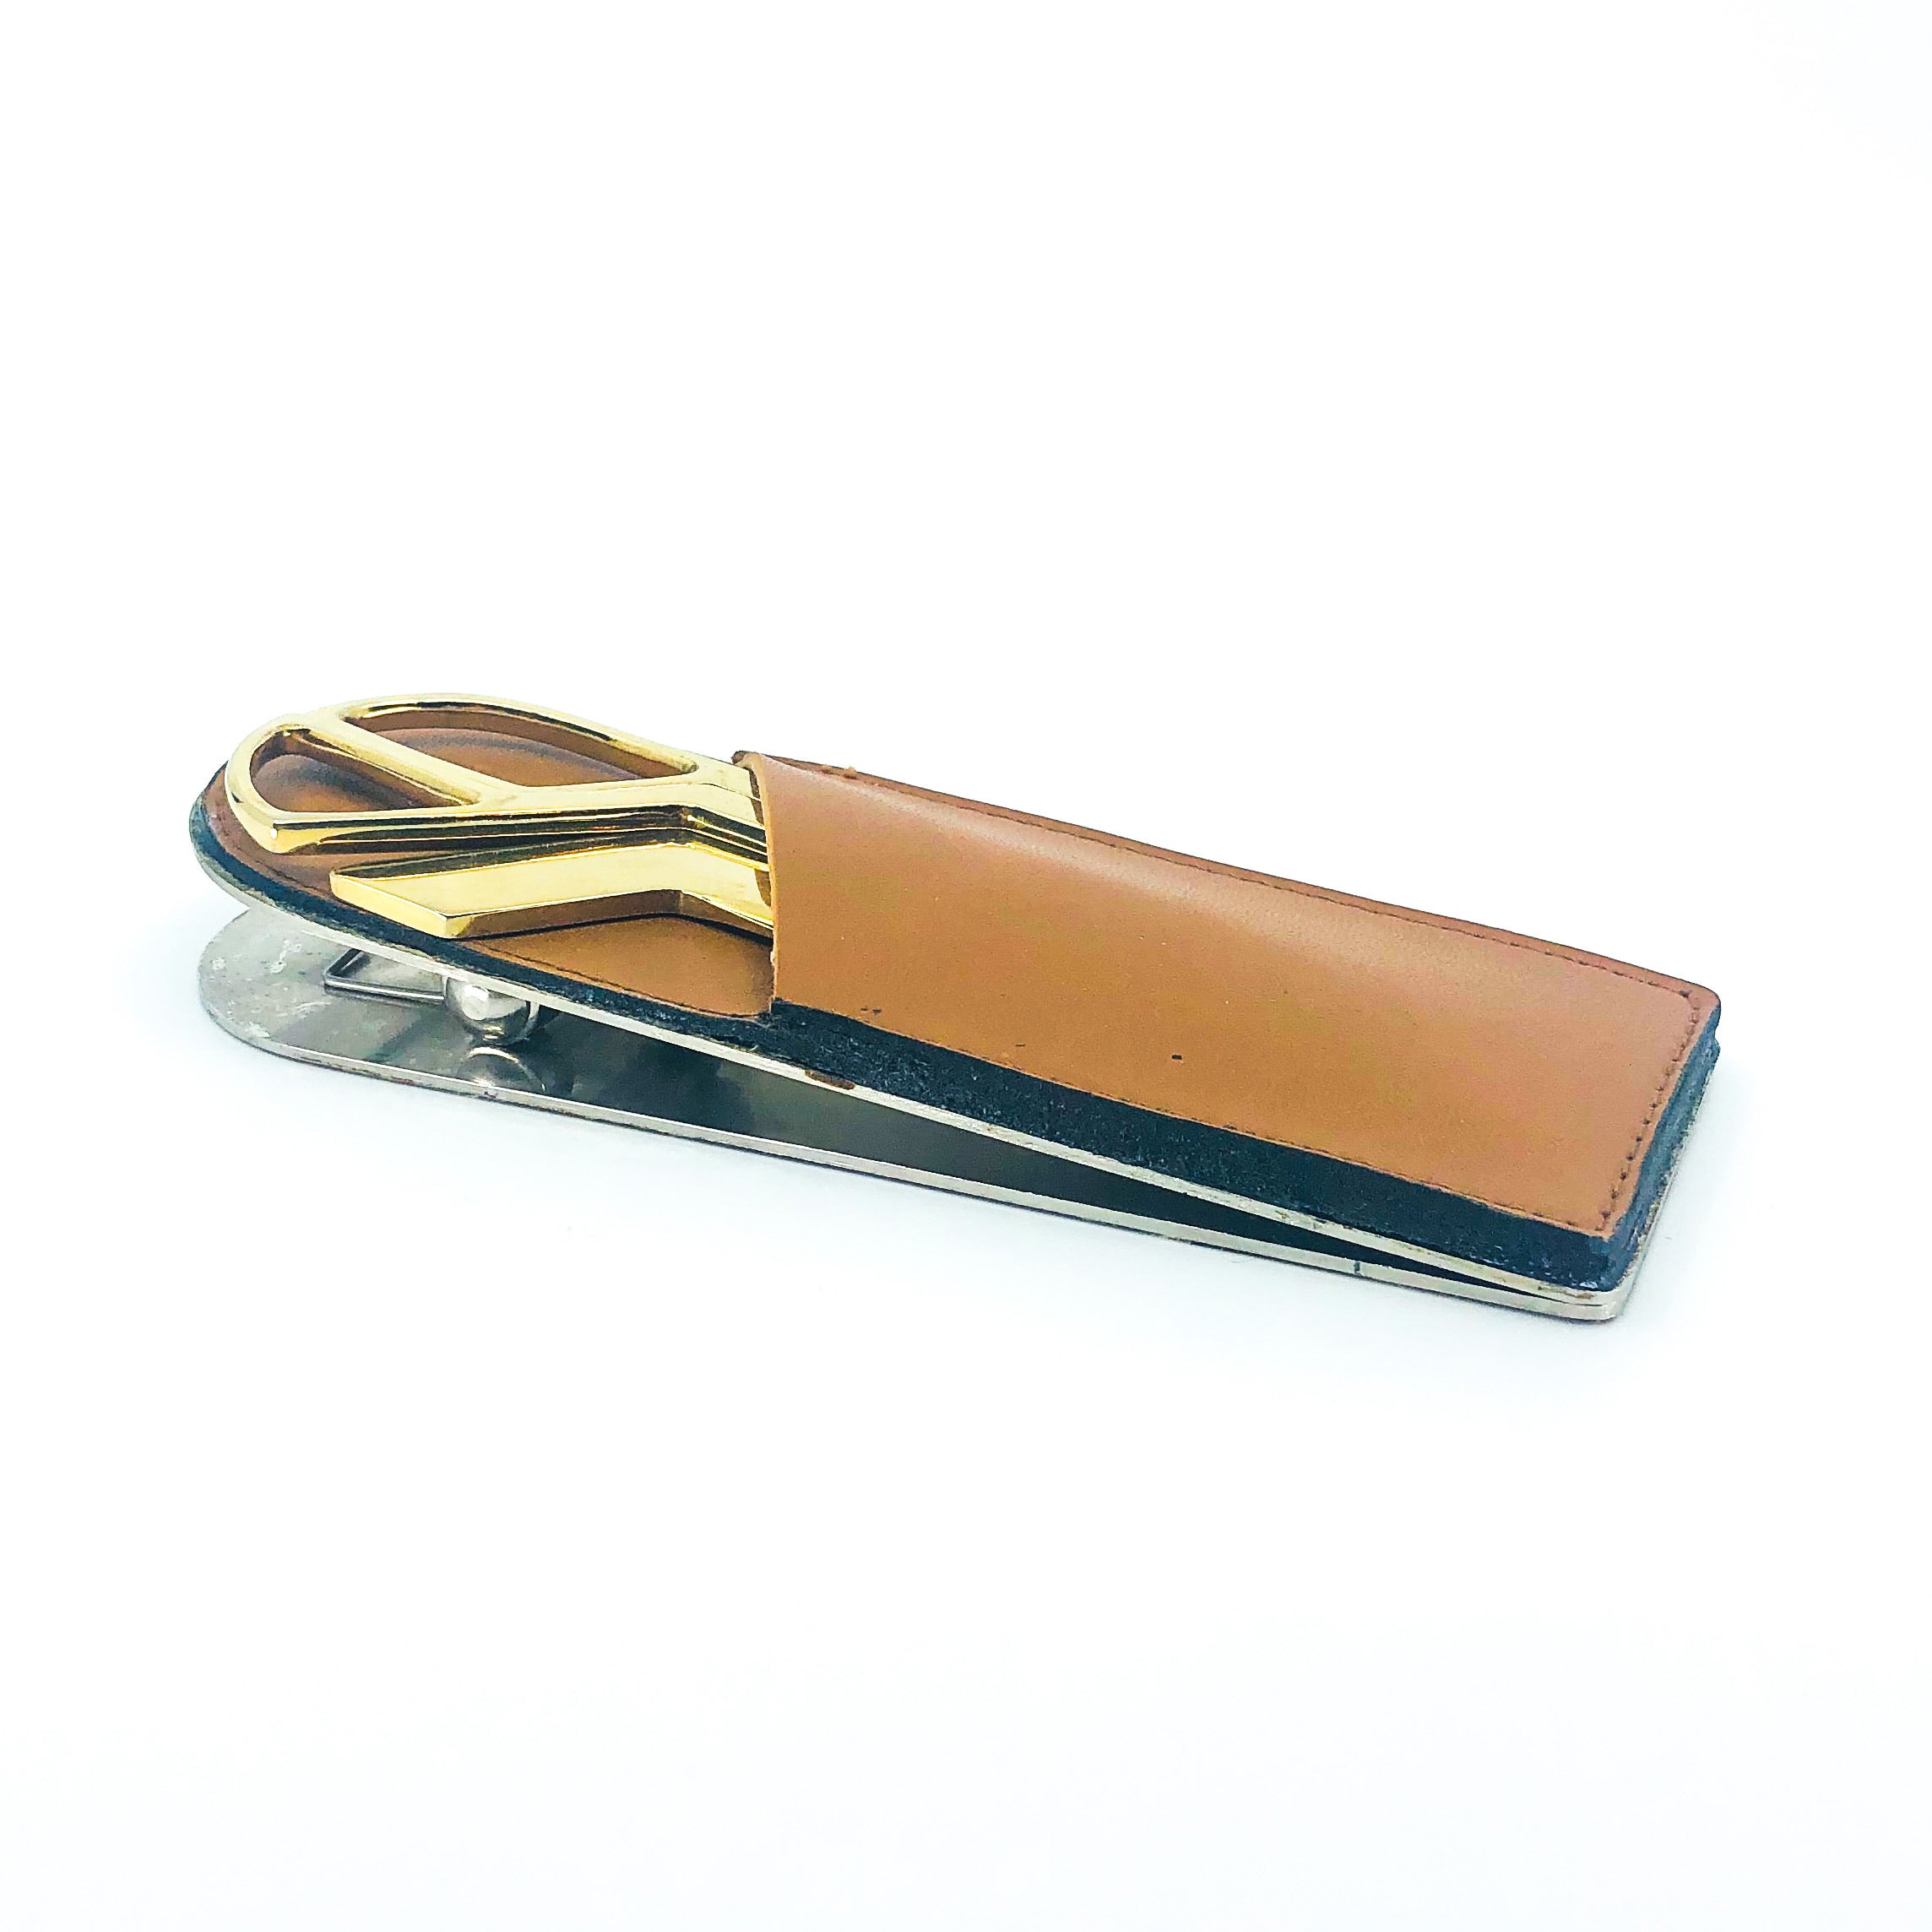 Vintage Leather Desk Organizer, Made in Italy